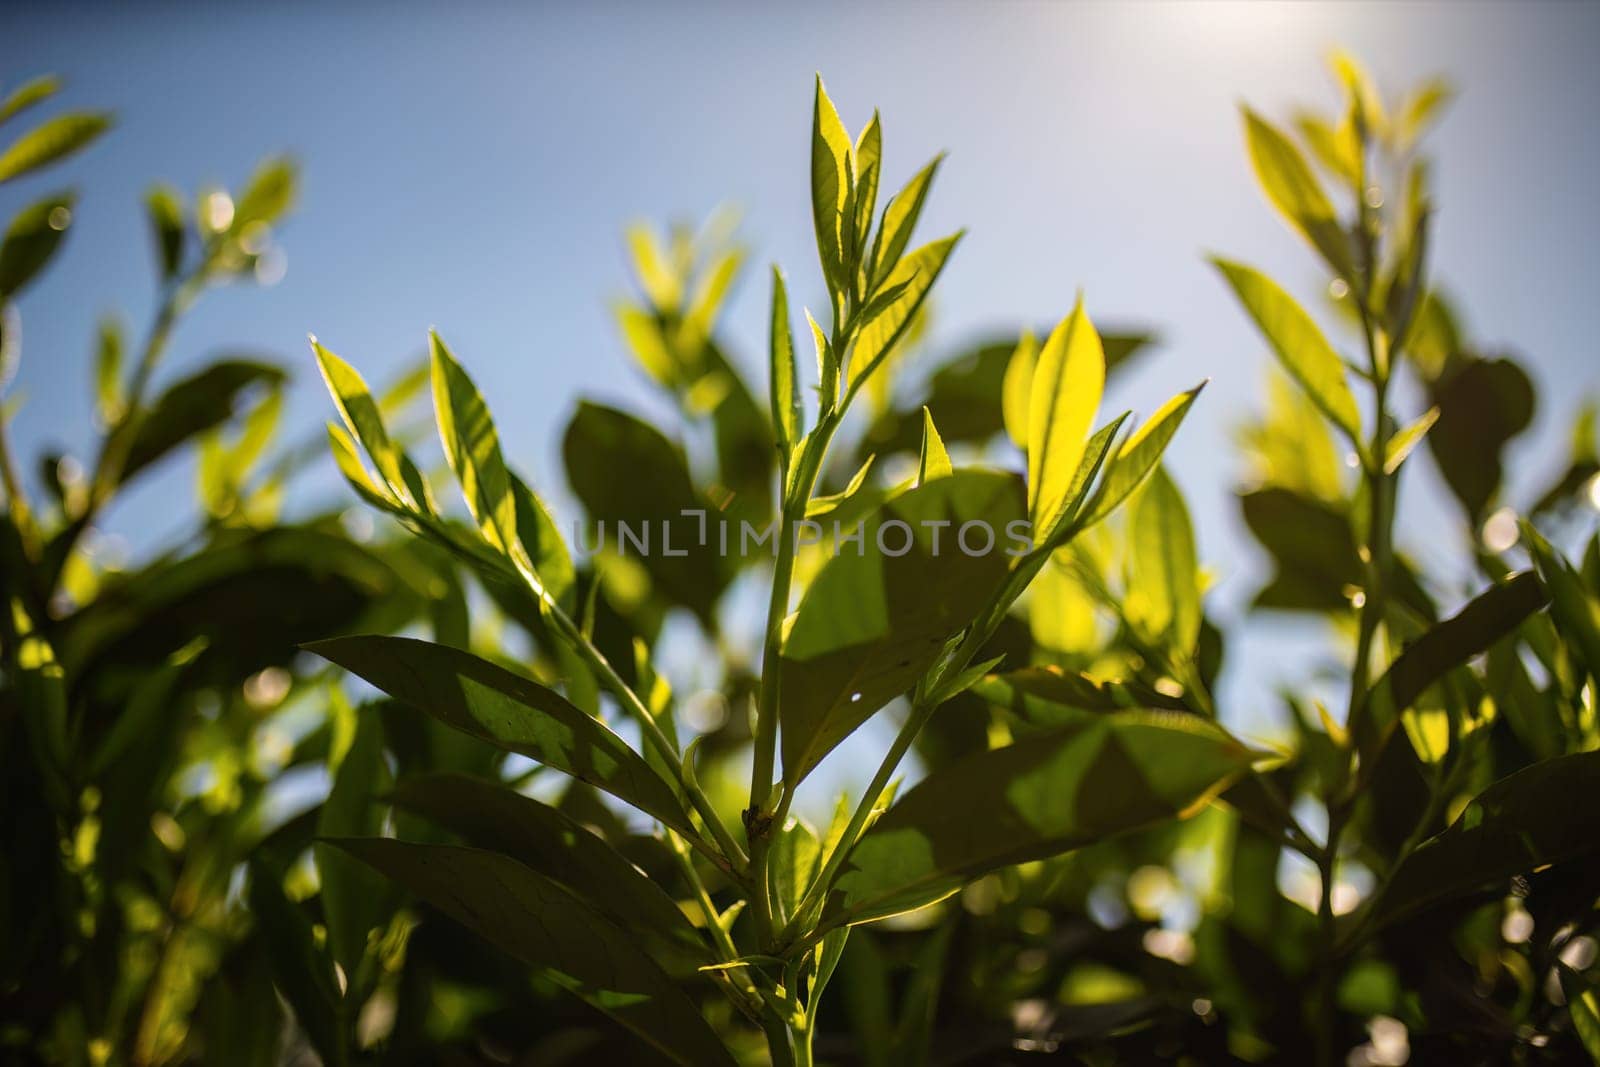 Detailed view of a vibrant green leafy plant, showcasing its intricate texture and color under natural lighting.